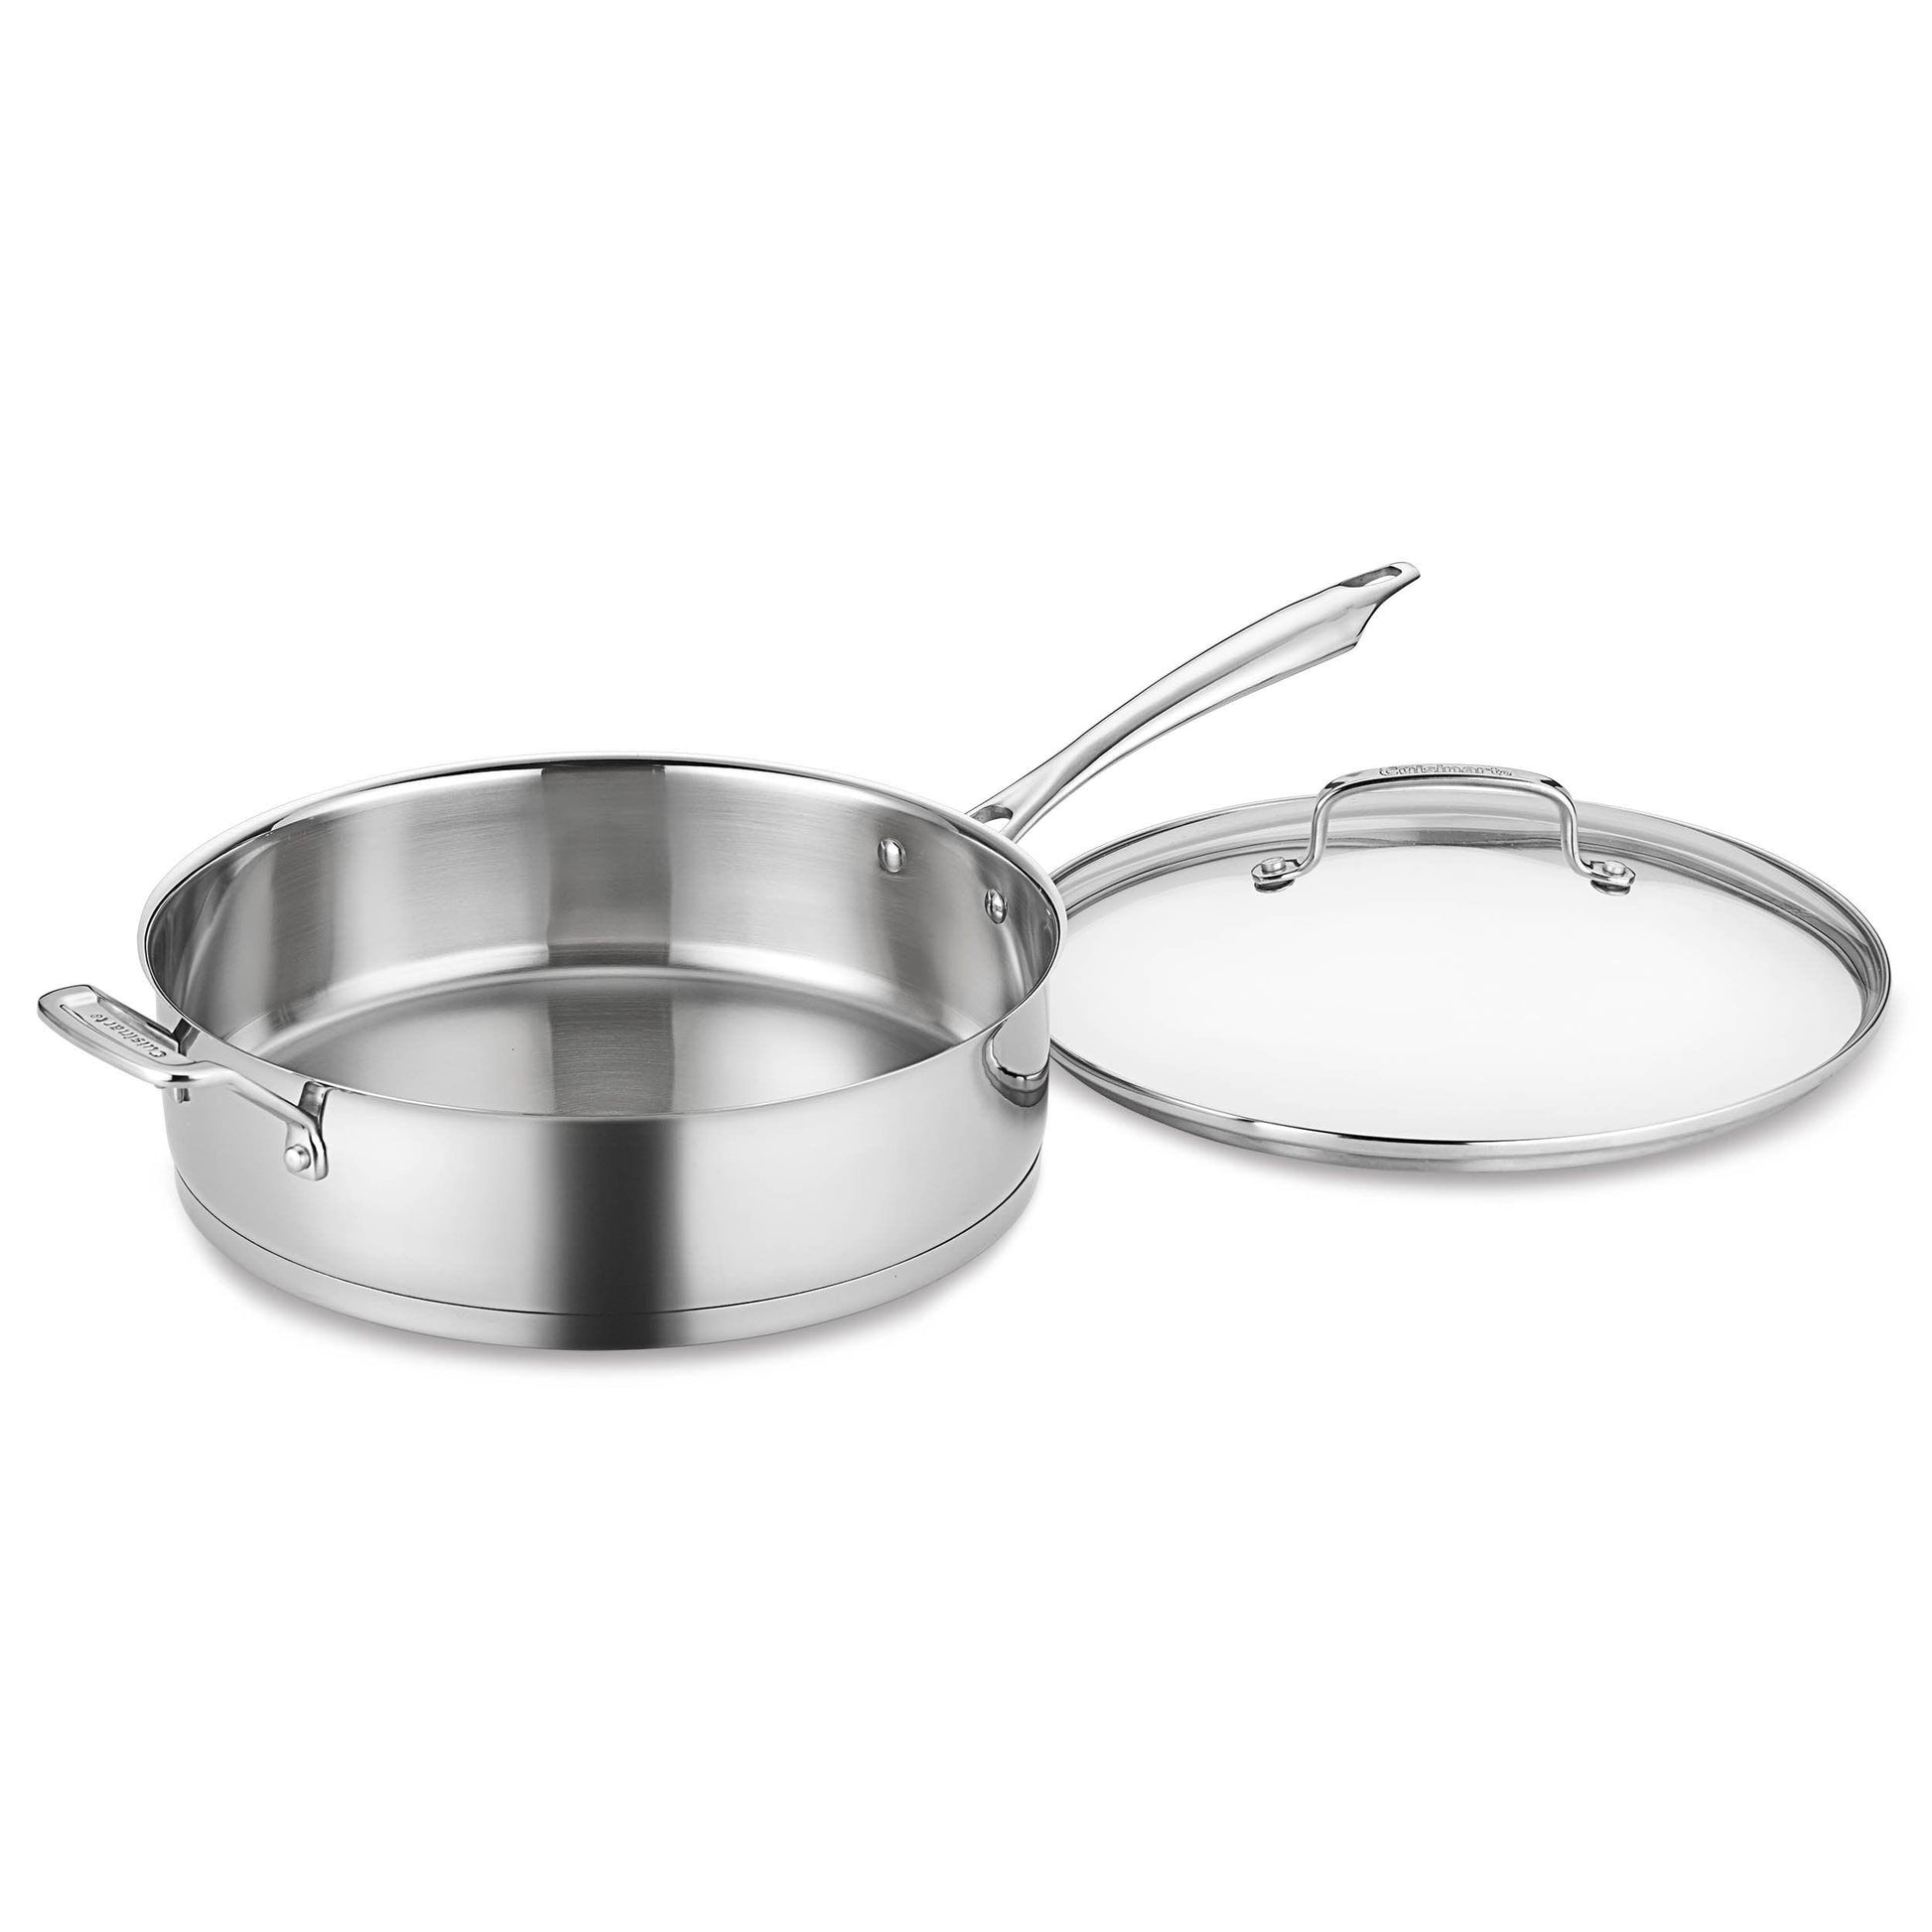 Cuisinart 3-Quart Saute Pan w/Helper & Cover, Stainless Steel - CookCave